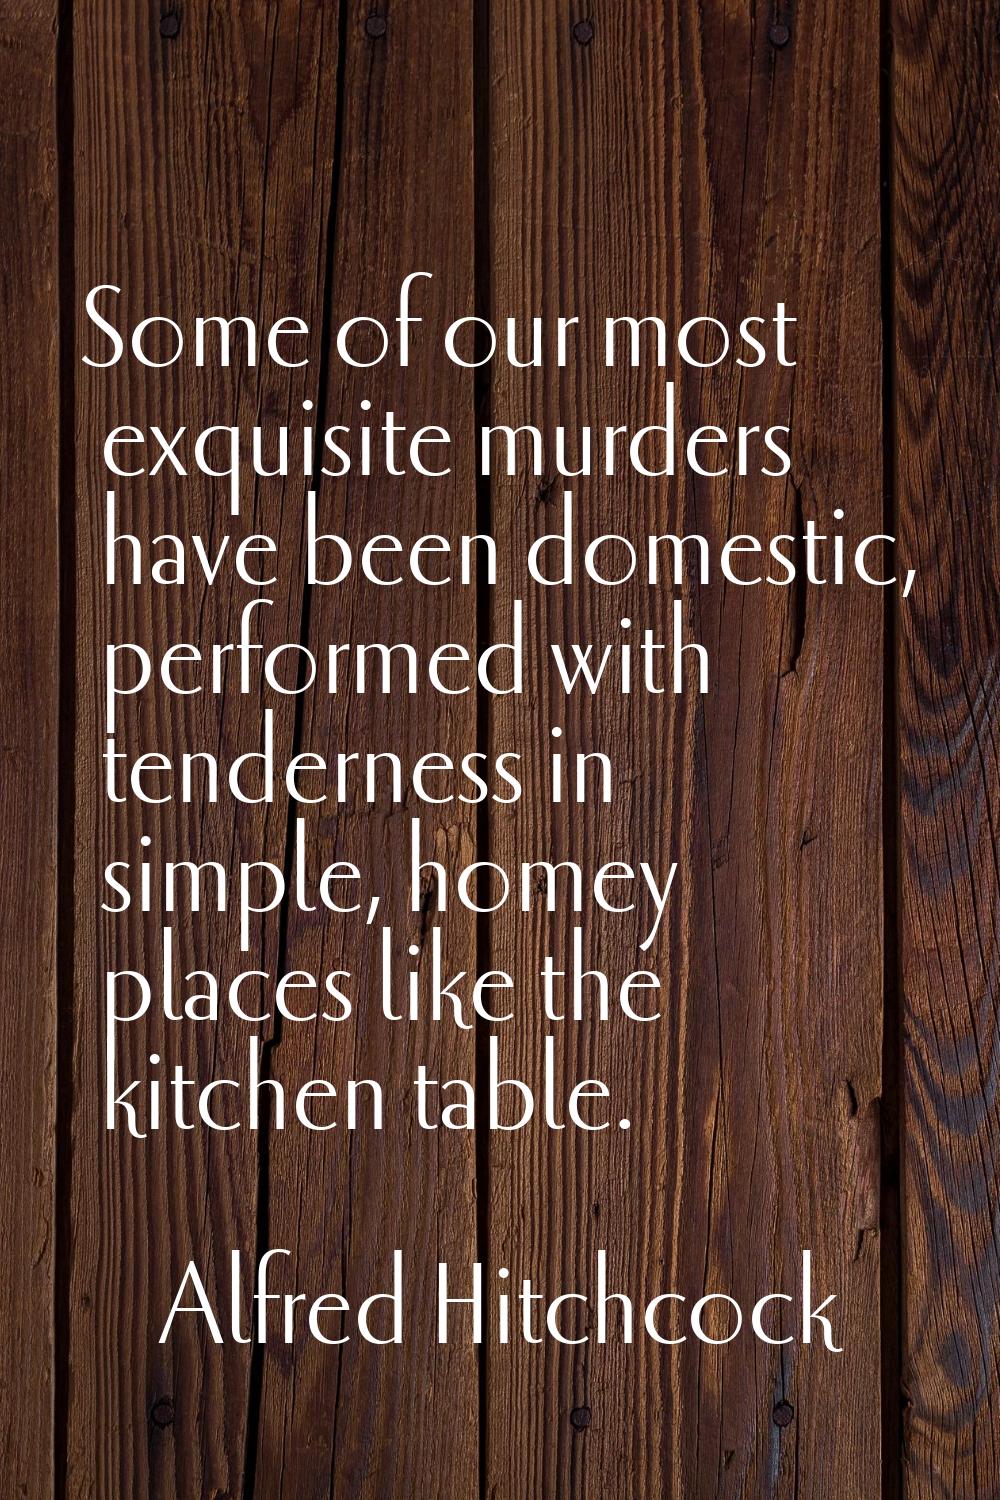 Some of our most exquisite murders have been domestic, performed with tenderness in simple, homey p